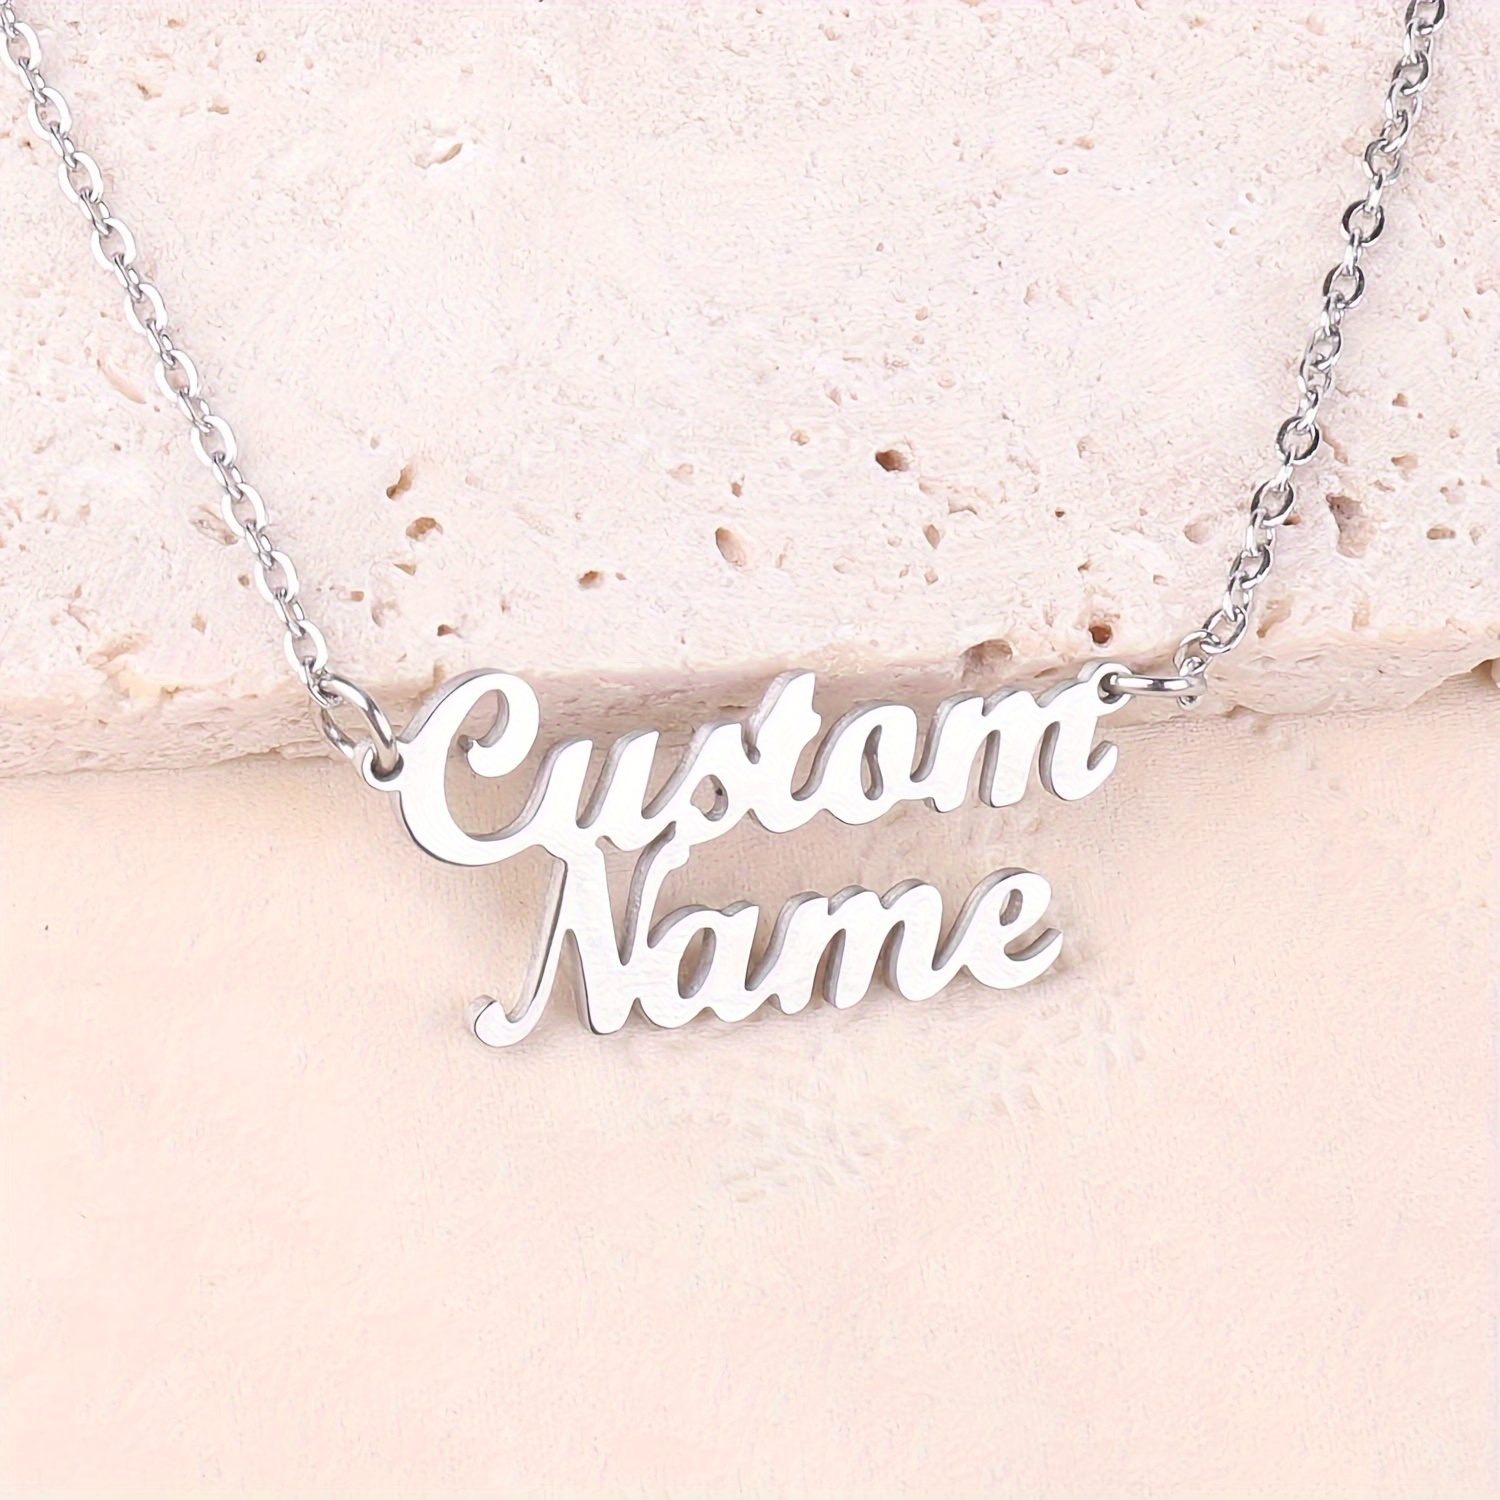 Name Necklace with Birth Flower and Birthstone - Custom Name Necklace - Personalized Name Necklace - Christmas Gift for Girls - Name Plate Necklace